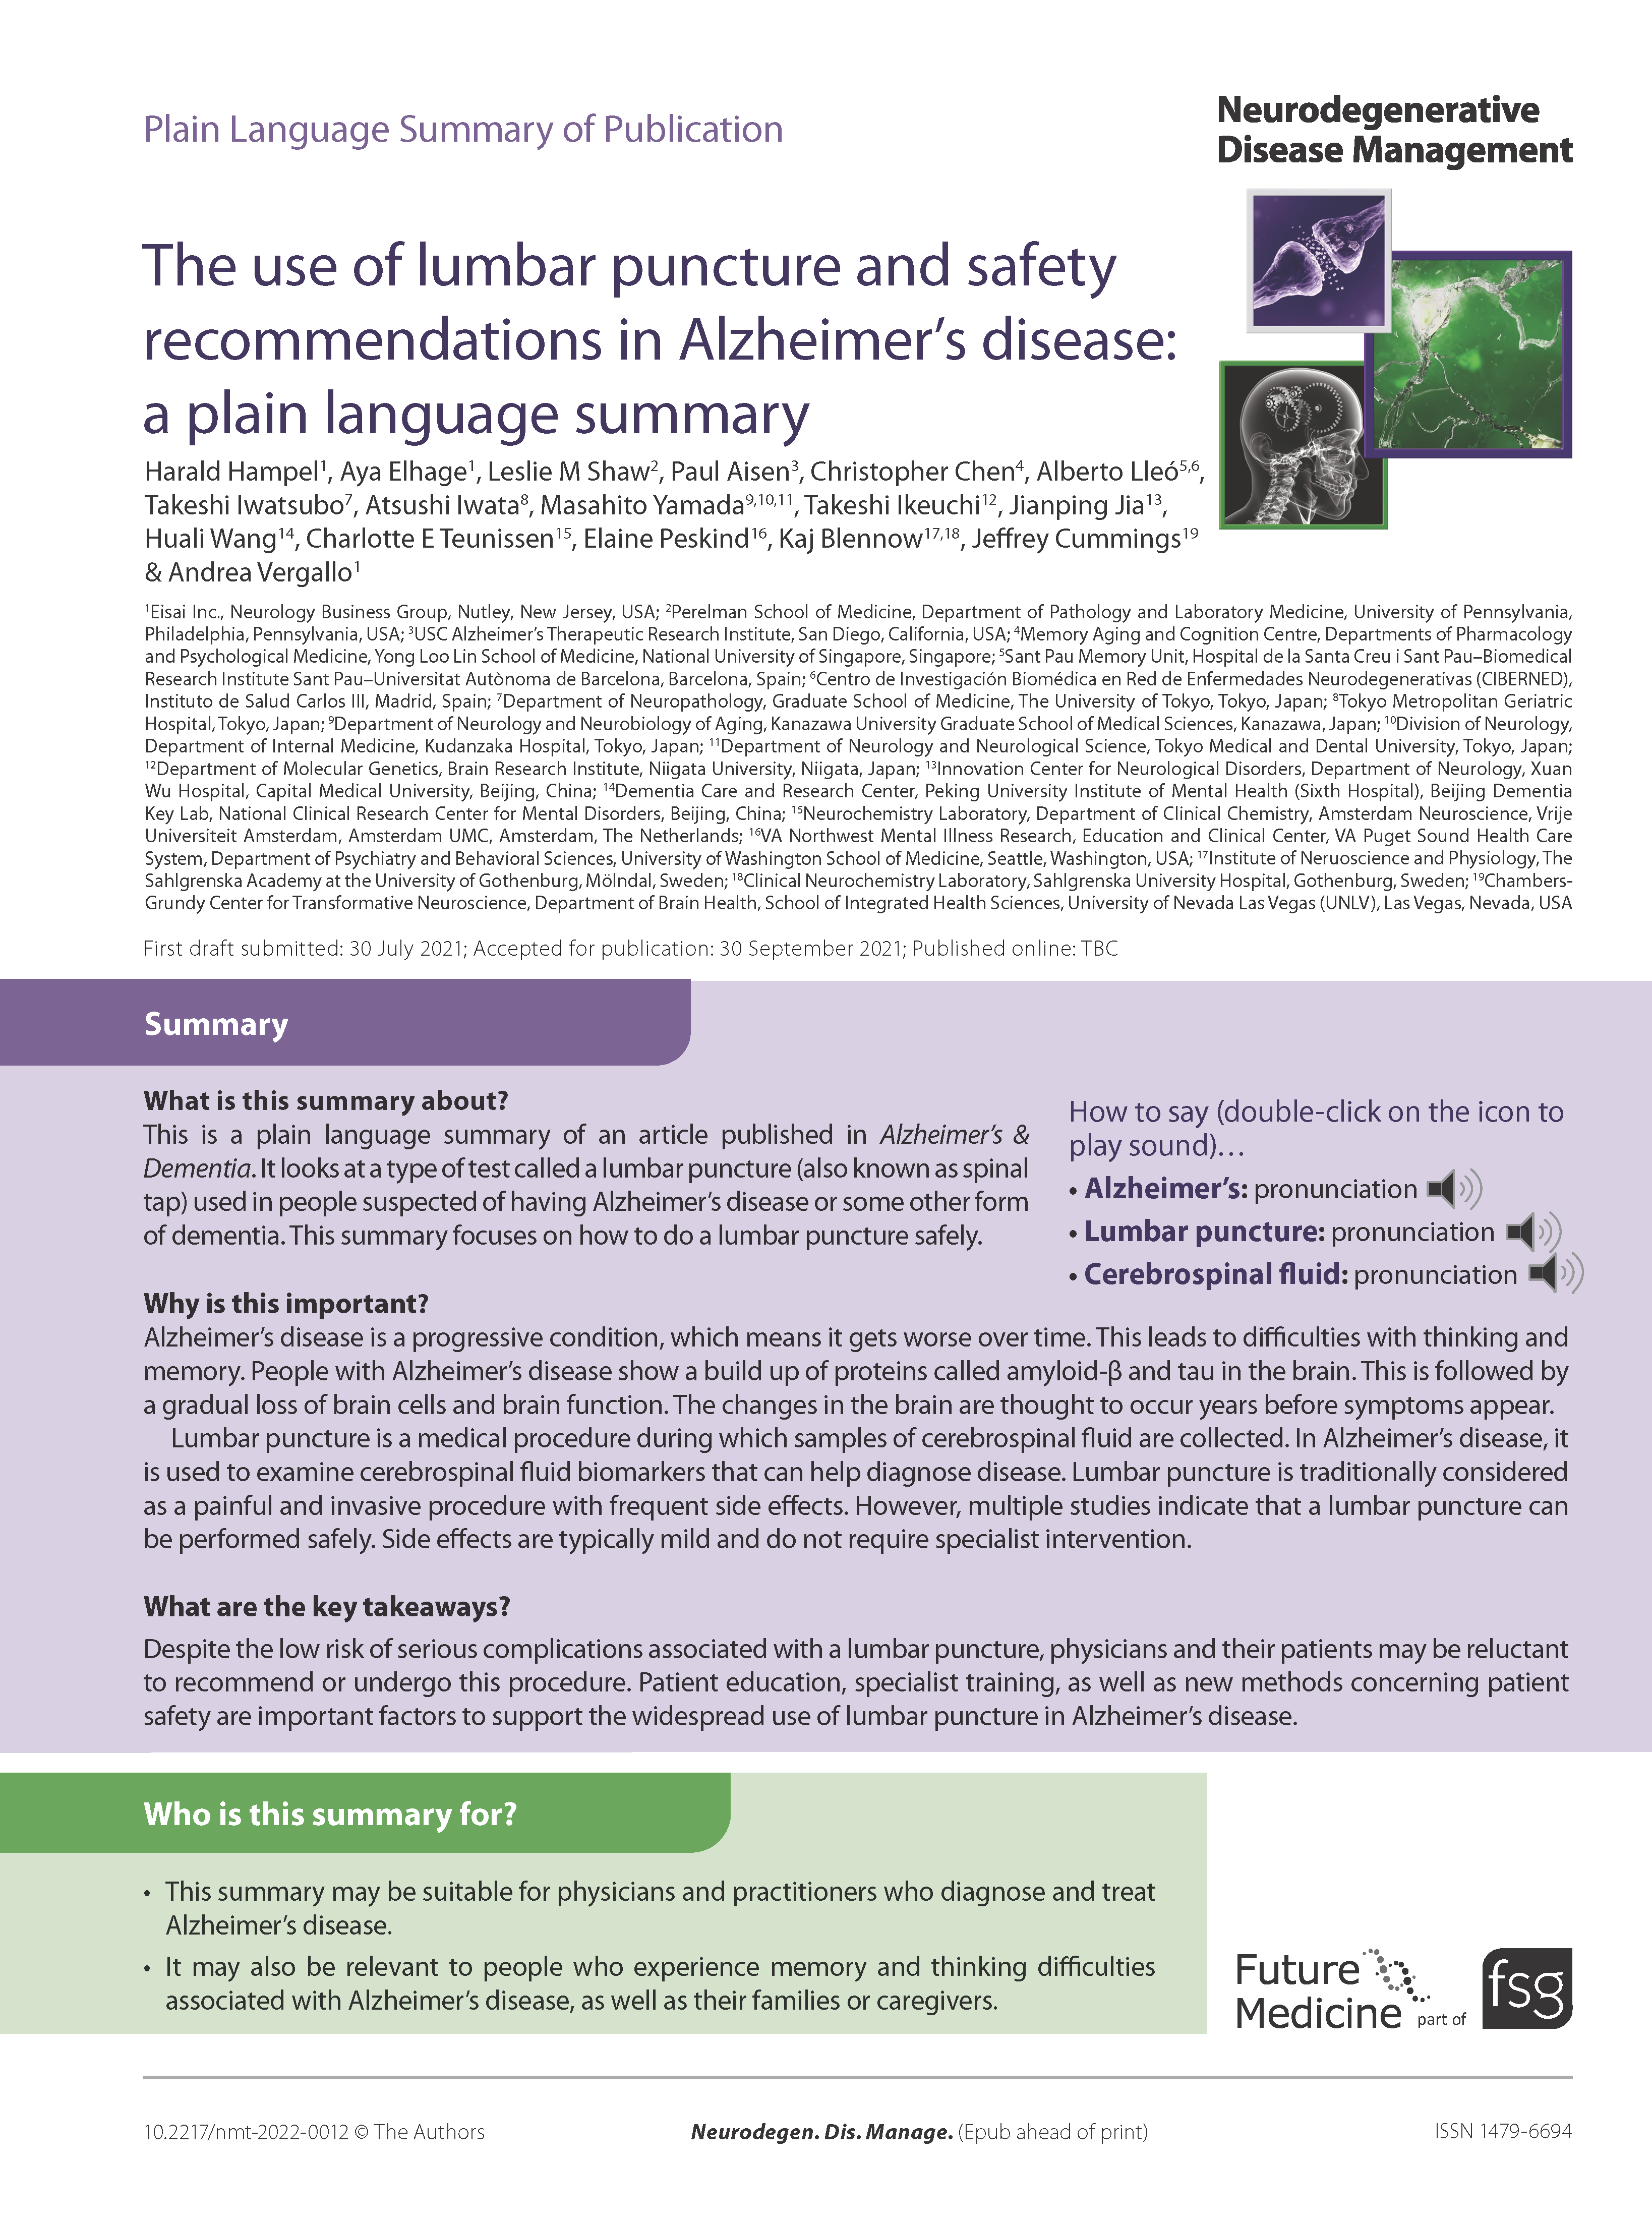 The use of lumbar puncture and safety recommendations in Alzheimer's  disease: a plain language summary - Plain Language Summaries